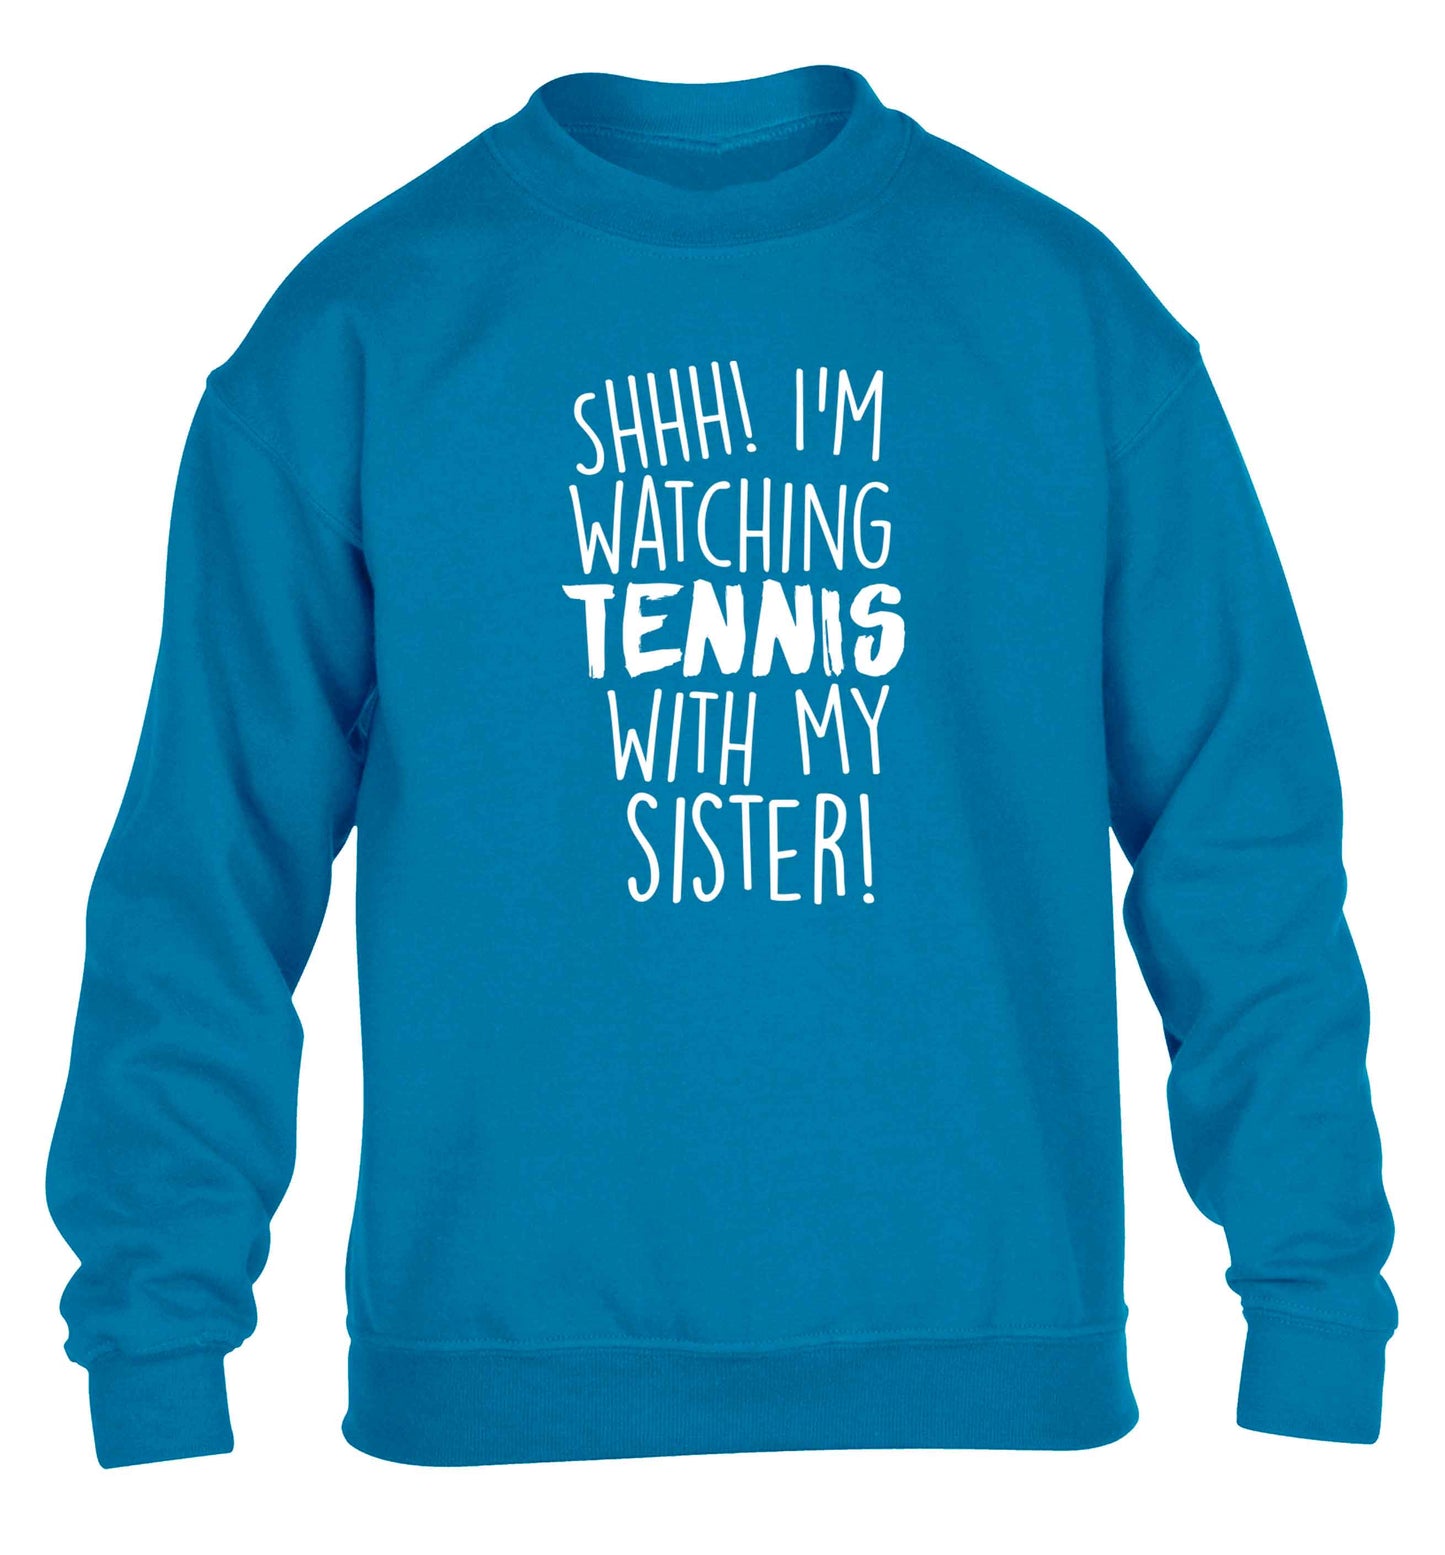 Shh! I'm watching tennis with my sister! children's blue sweater 12-13 Years